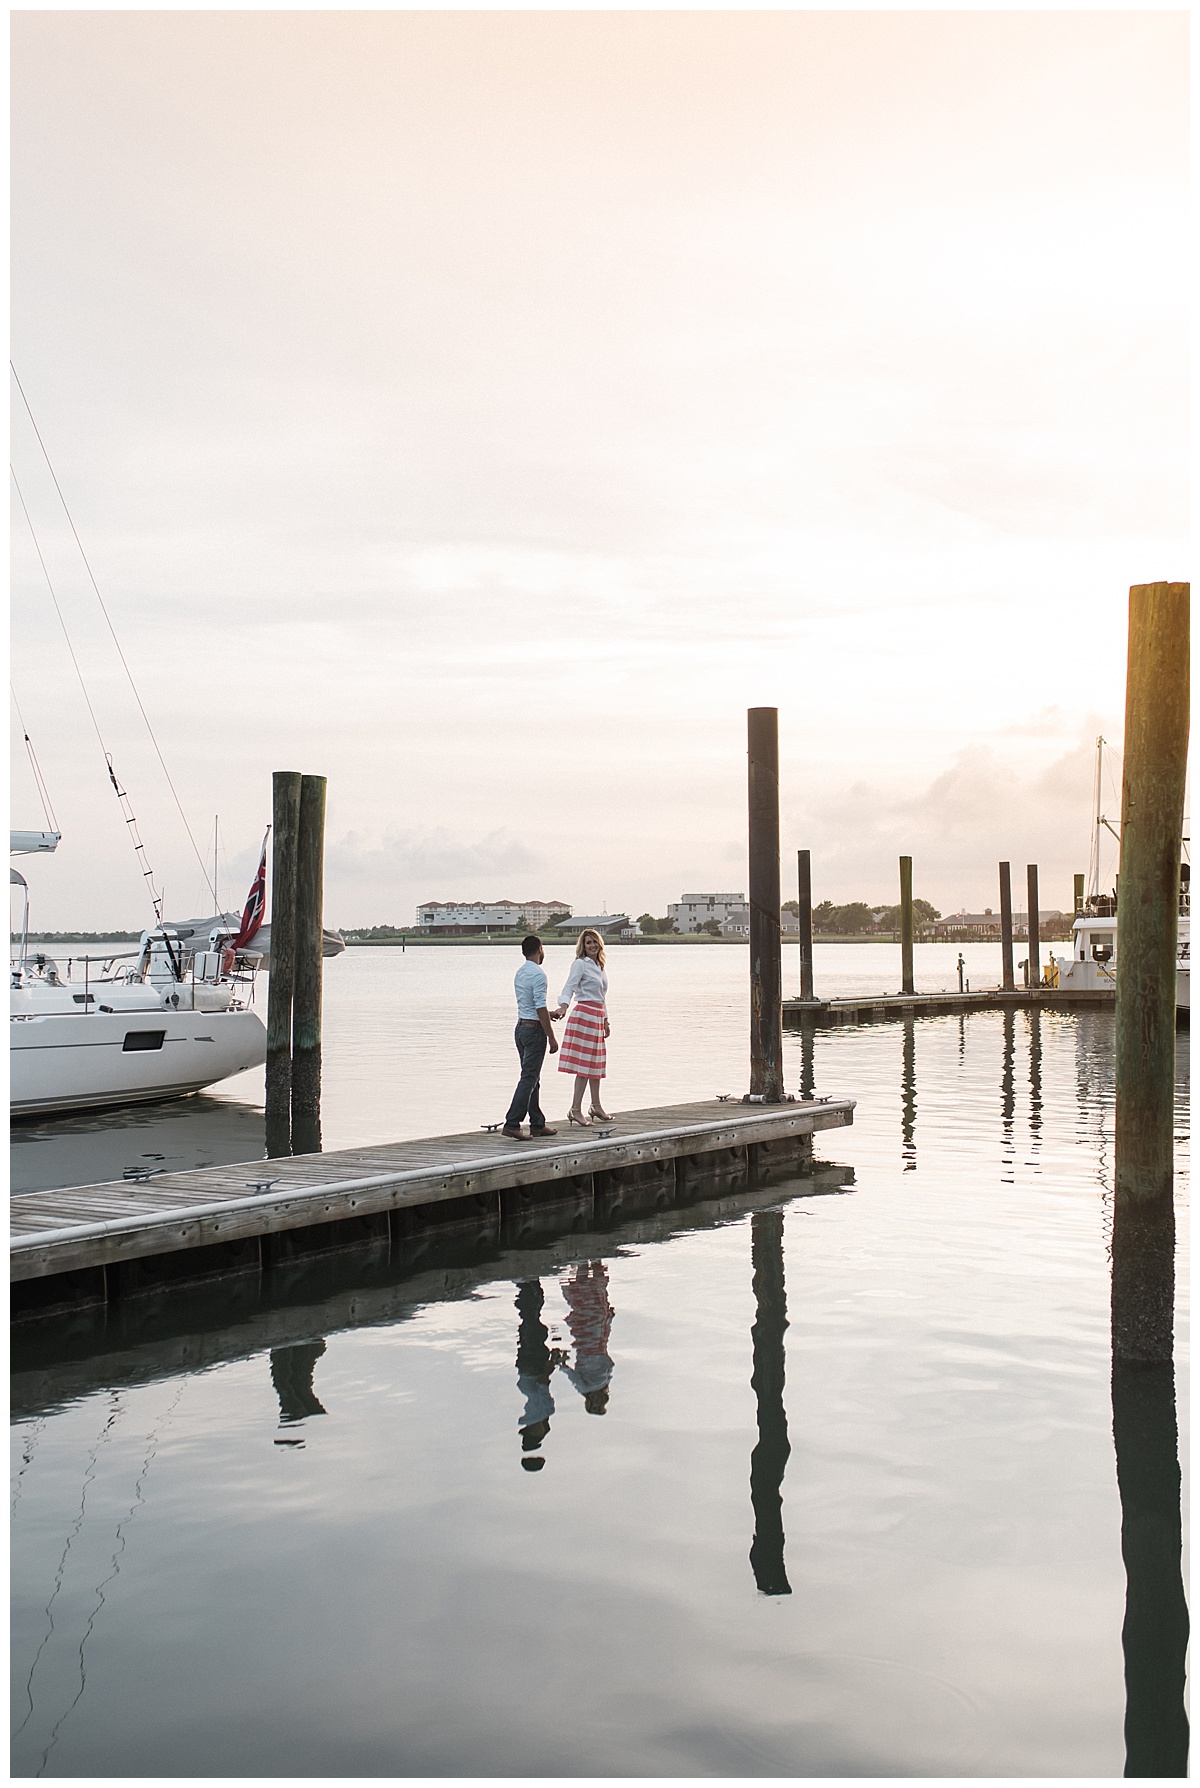 Durham, Raleigh, Chapel Hill engagement, wedding, lifestyle photographer | Radian Photography | Waterfront lifestyle session | Beaufort, North Carolina |www.radianphotography.com